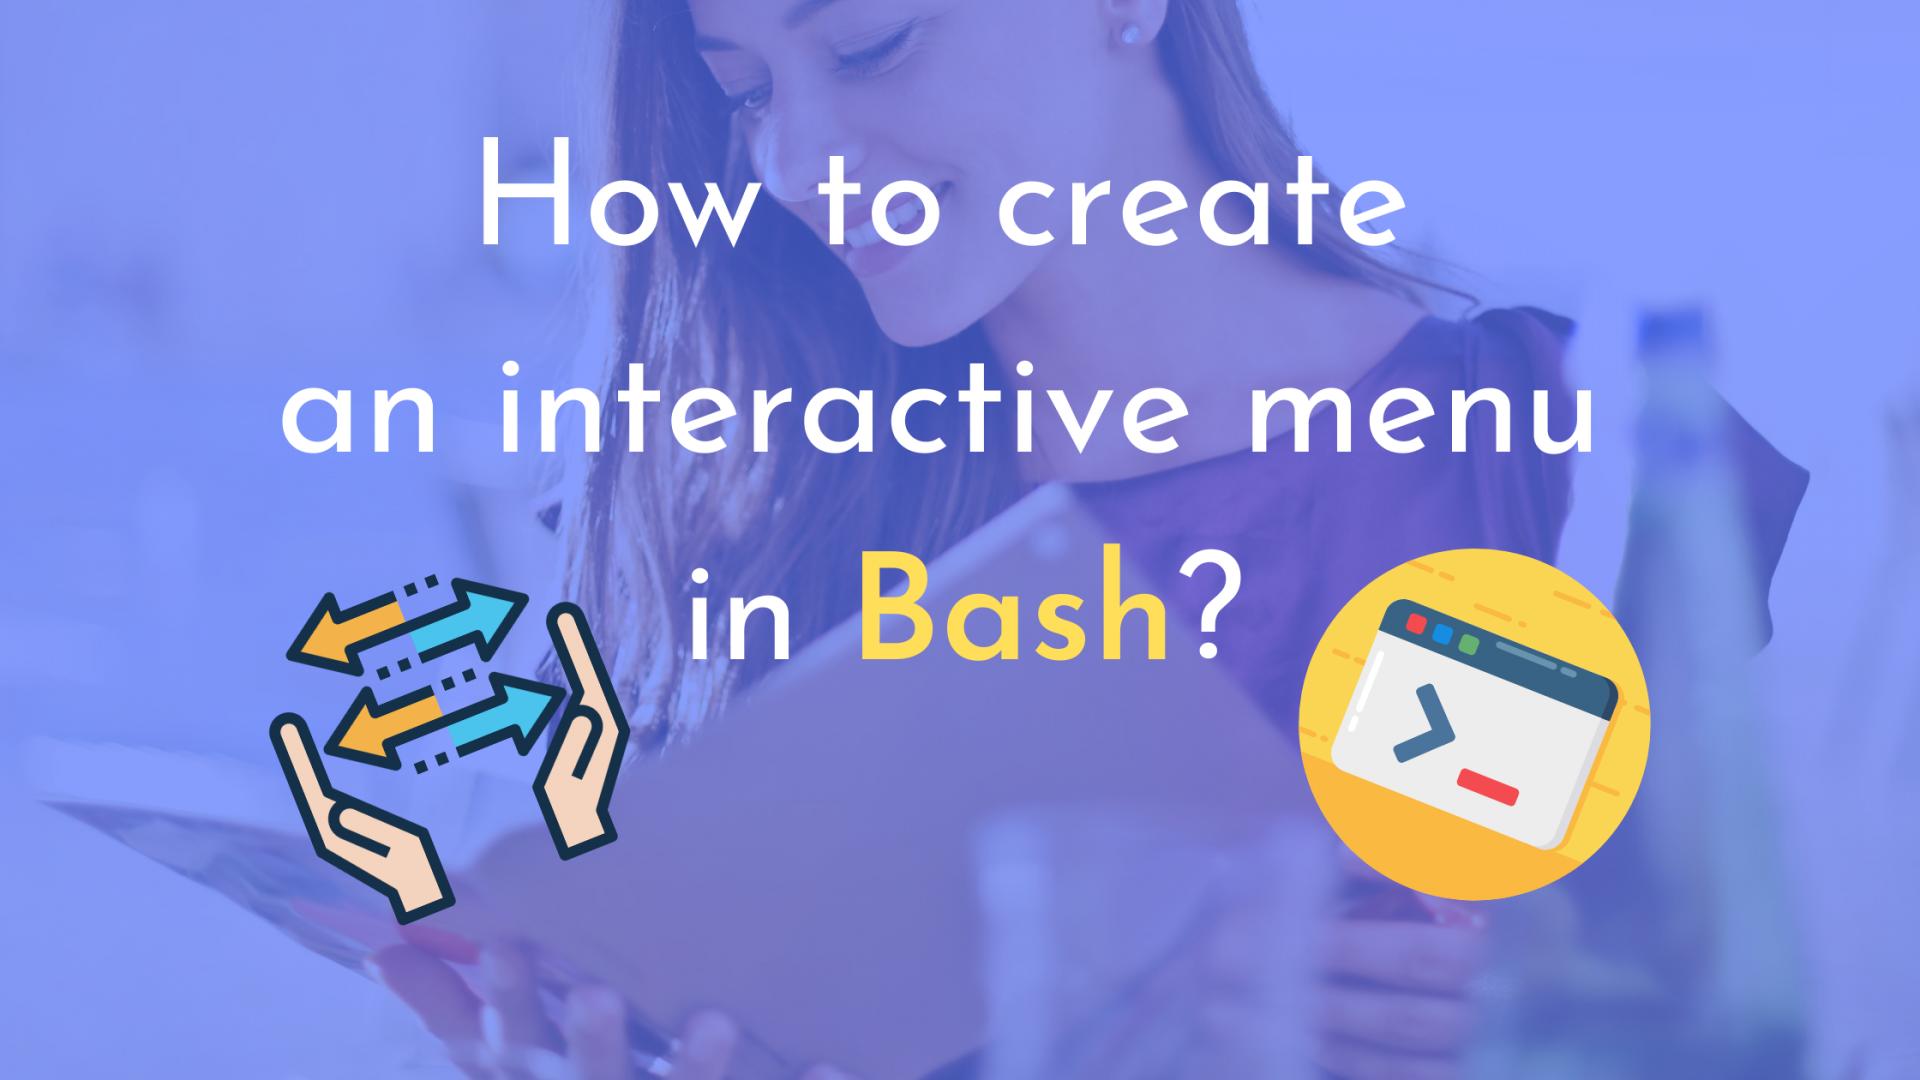 How to create an interactive menu in Bash?